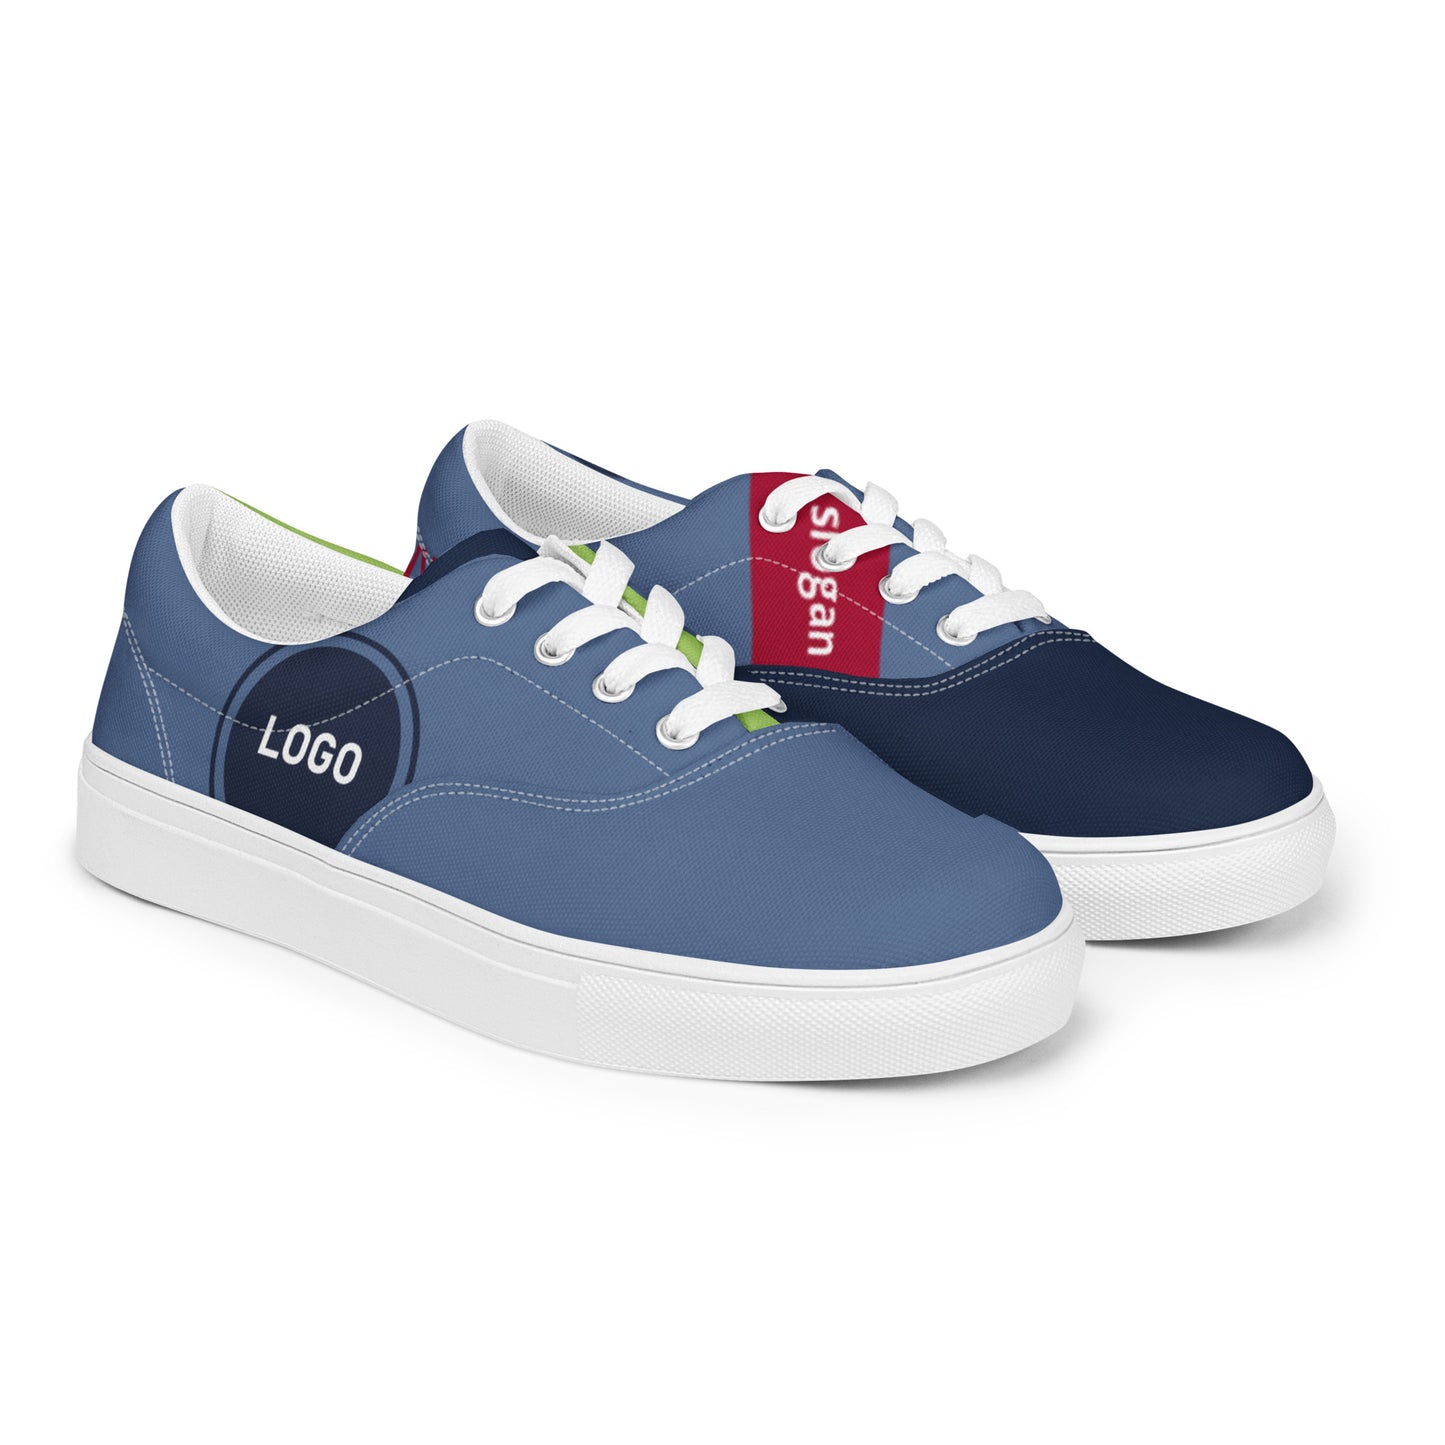 TIME OF VIBES - Women’s lace-up canvas shoes CORPORATE - €109.00